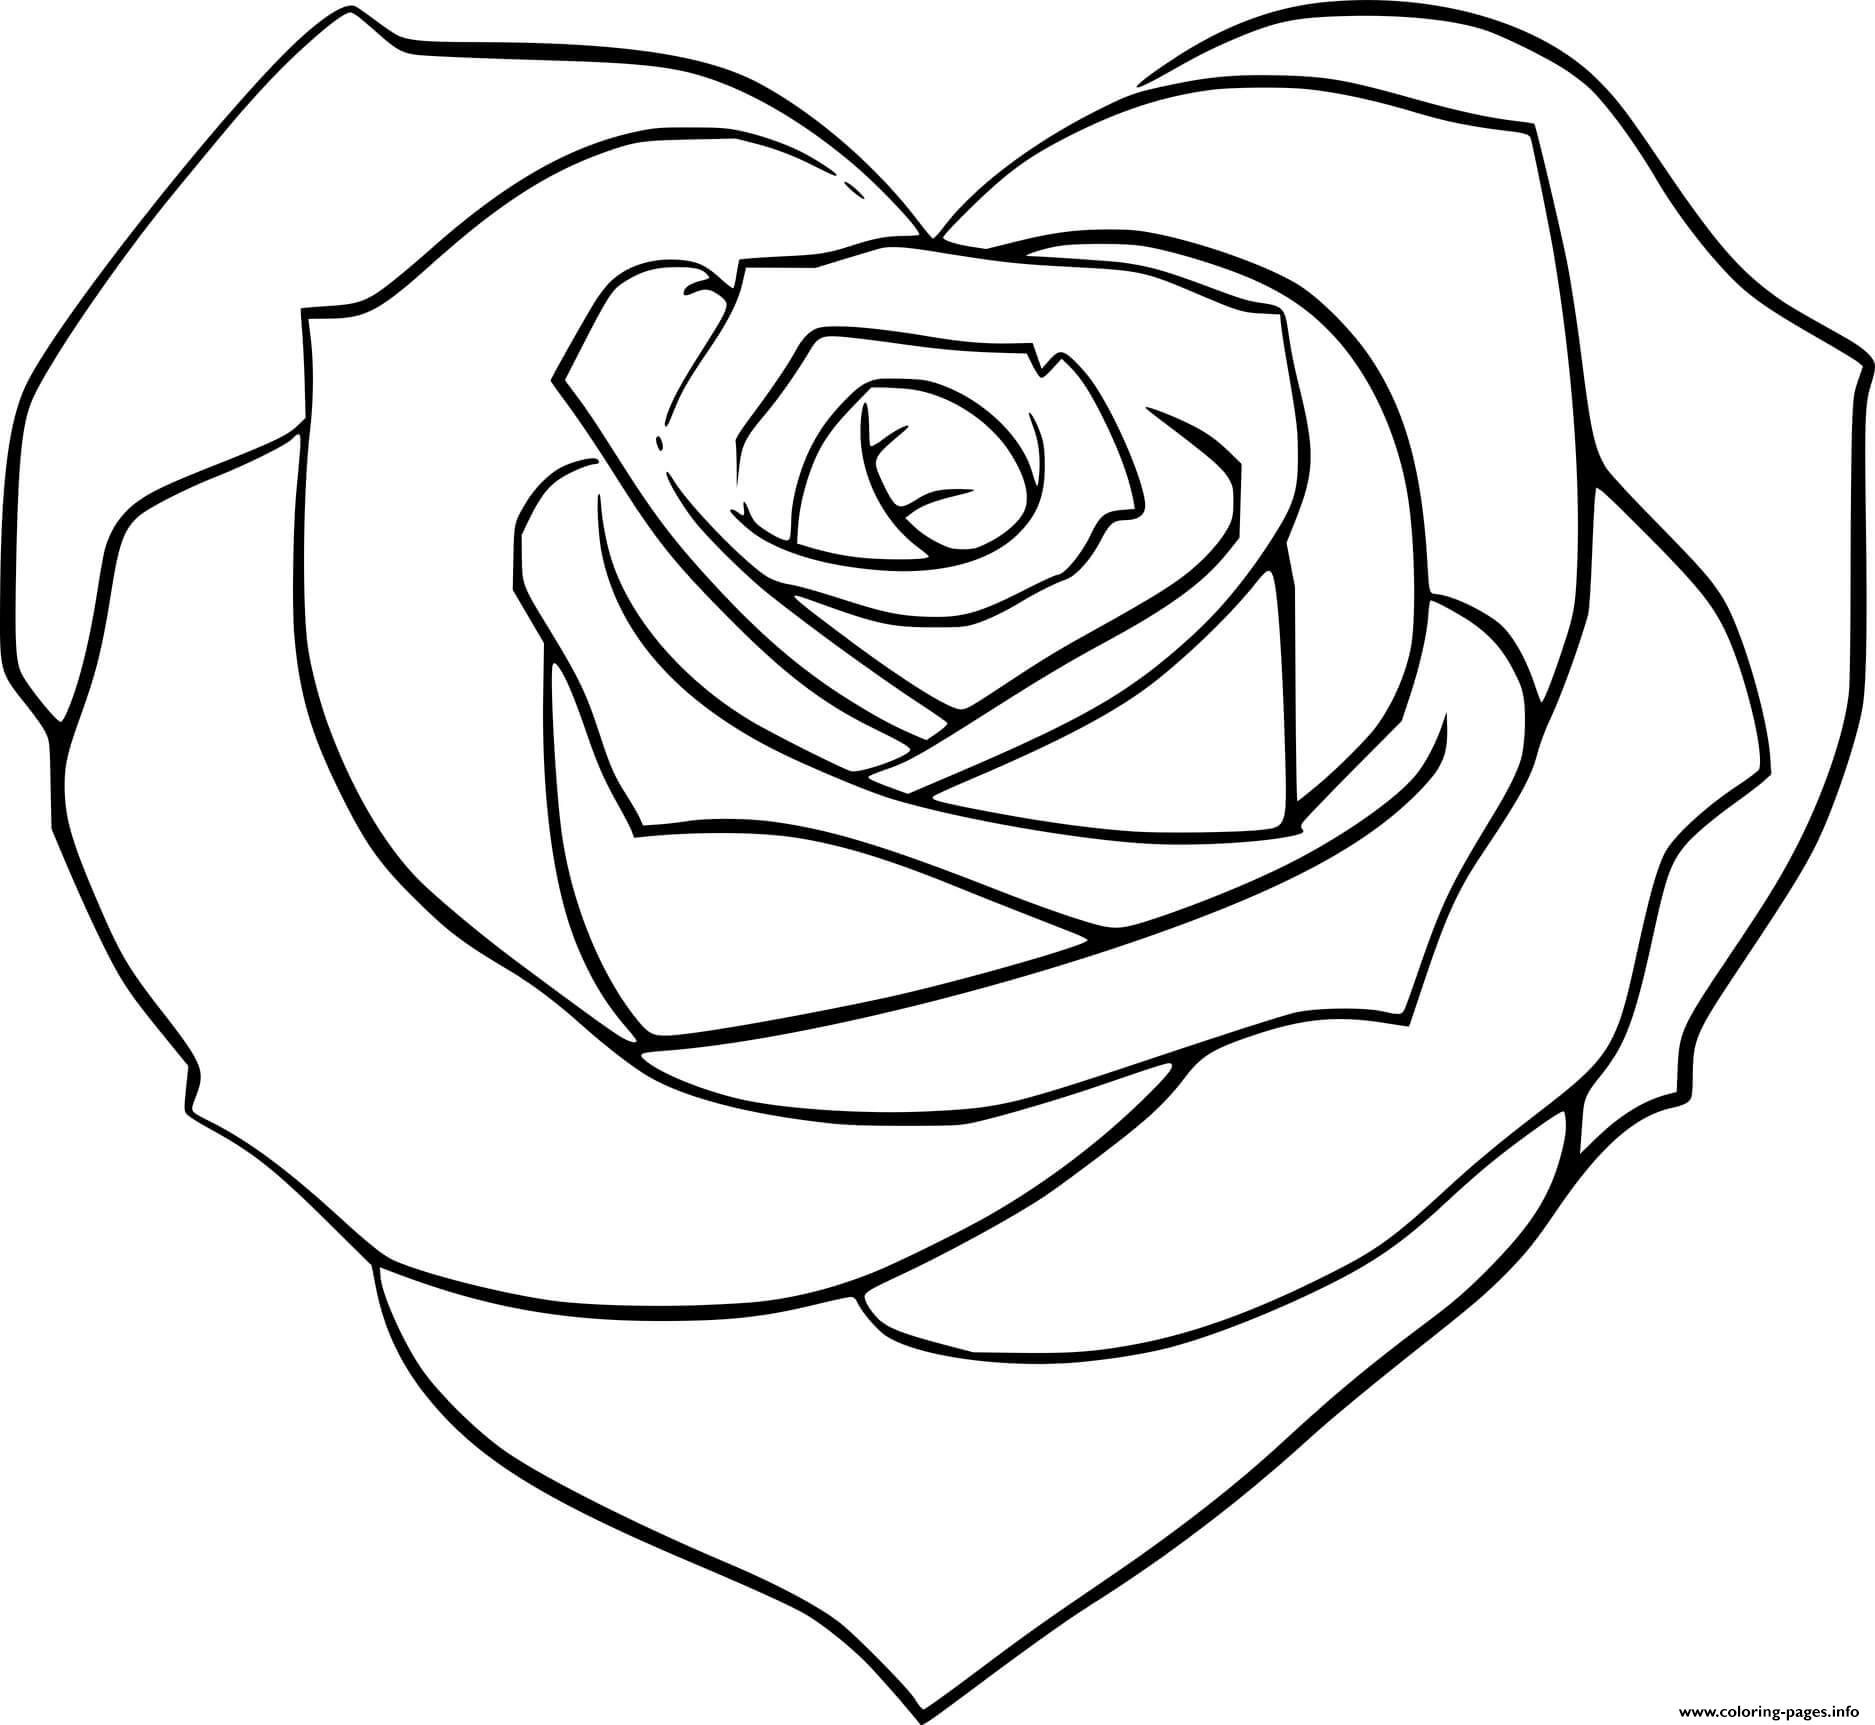 Heart Shaped Rose coloring